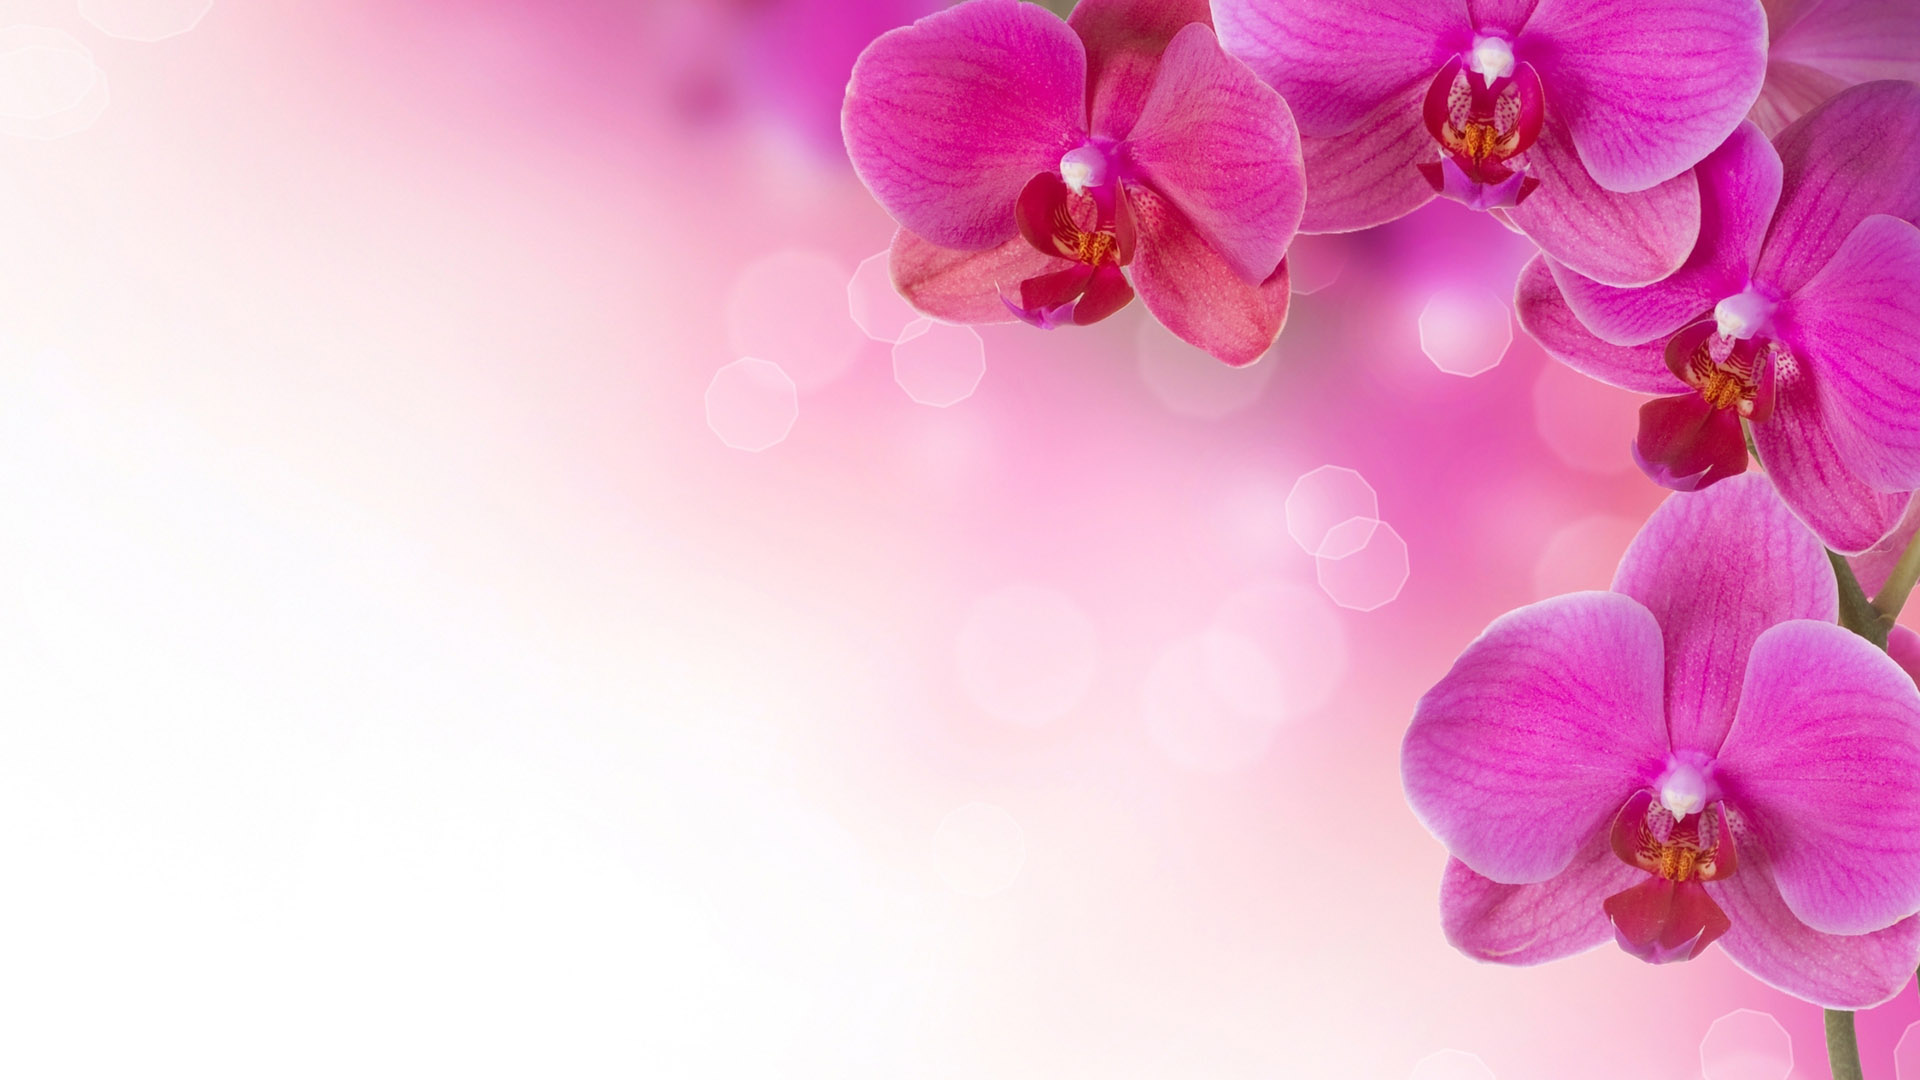 100% Quality HD Pink Flowers Wallpapers Widescreen, for PC & Mac ...